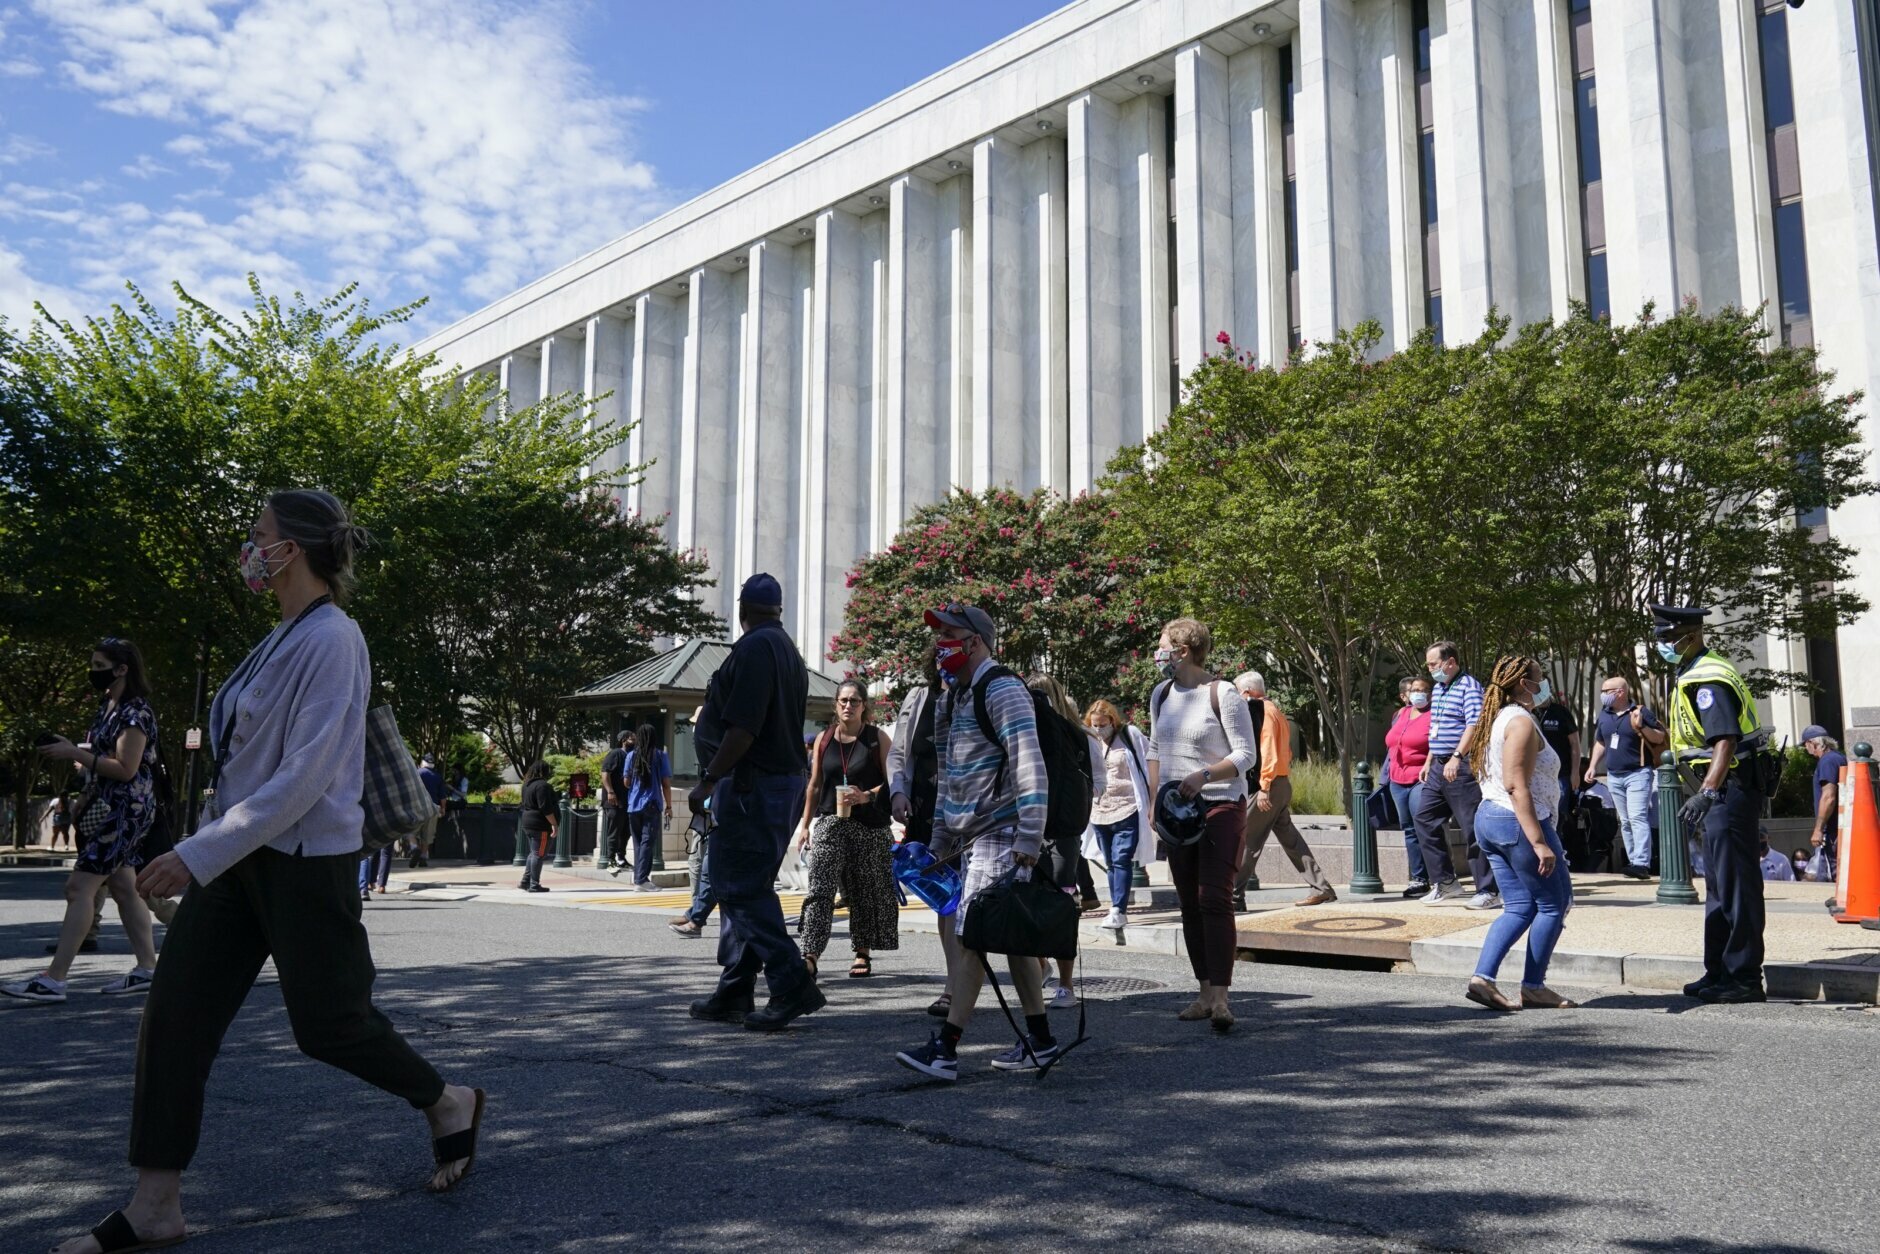 People are evacuated from the James Madison Memorial Building, a Library of Congress building, in Washington on Thursday, Aug. 19, 2021, as law enforcement investigate a report of a pickup truck containing an explosive device near the U.S. Capitol. (AP Photo/Alex Brandon)